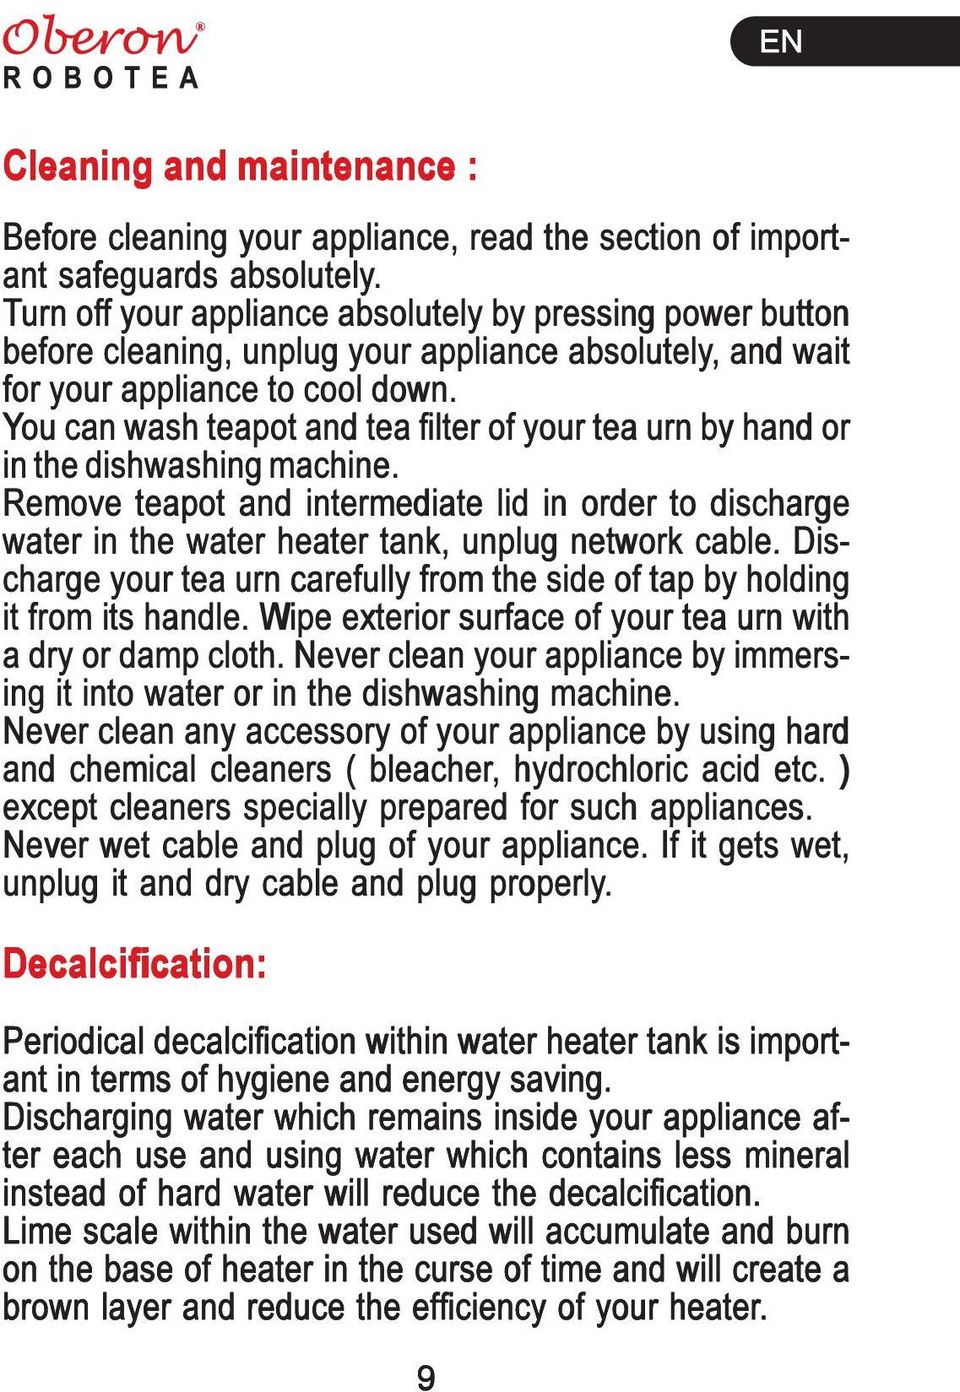 You can wash teapot and tea filter of your tea urn by hand or in the dishwashing machine. Remove teapot and intermediate lid in order to discharge water in the water heater tank, unplug network cable.